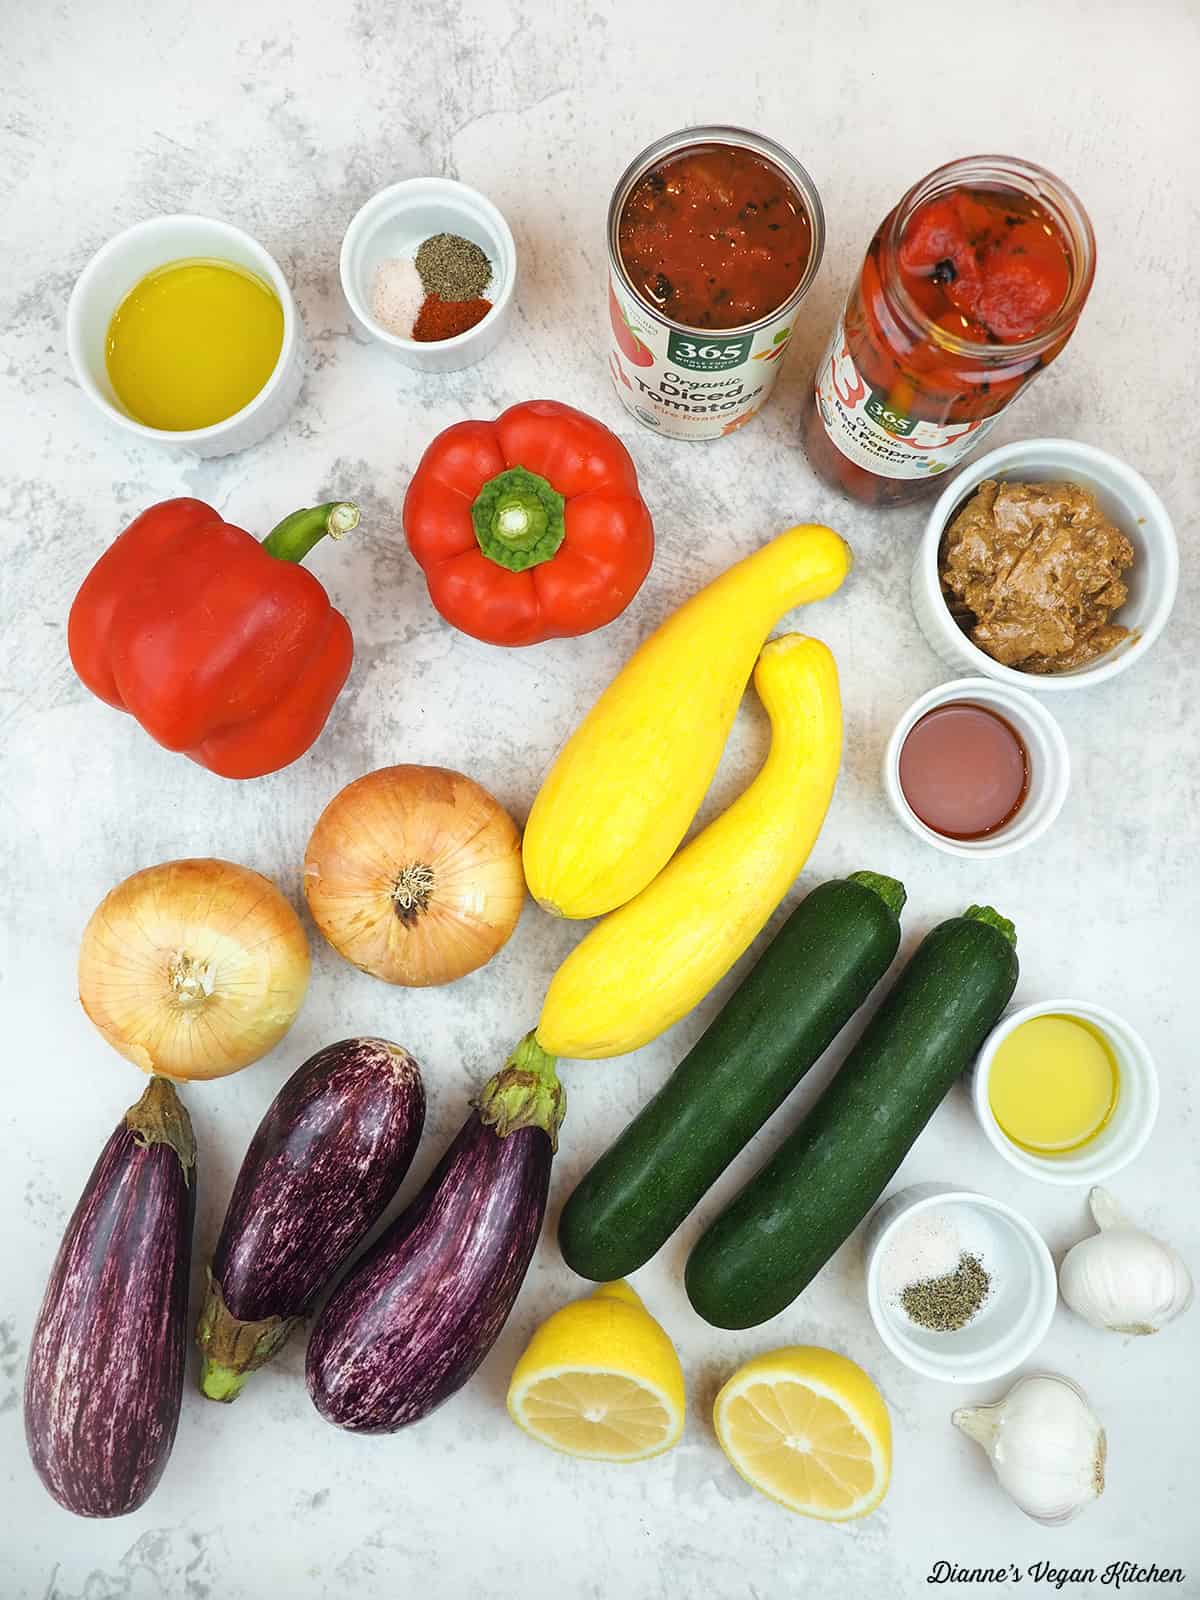 olive oil, spices, roasted tomatoes, roasted red peppers, almond butter, agave, squash, zucchini, onions, eggplant, garlic, salt and pepper, lemons, and bell peppers